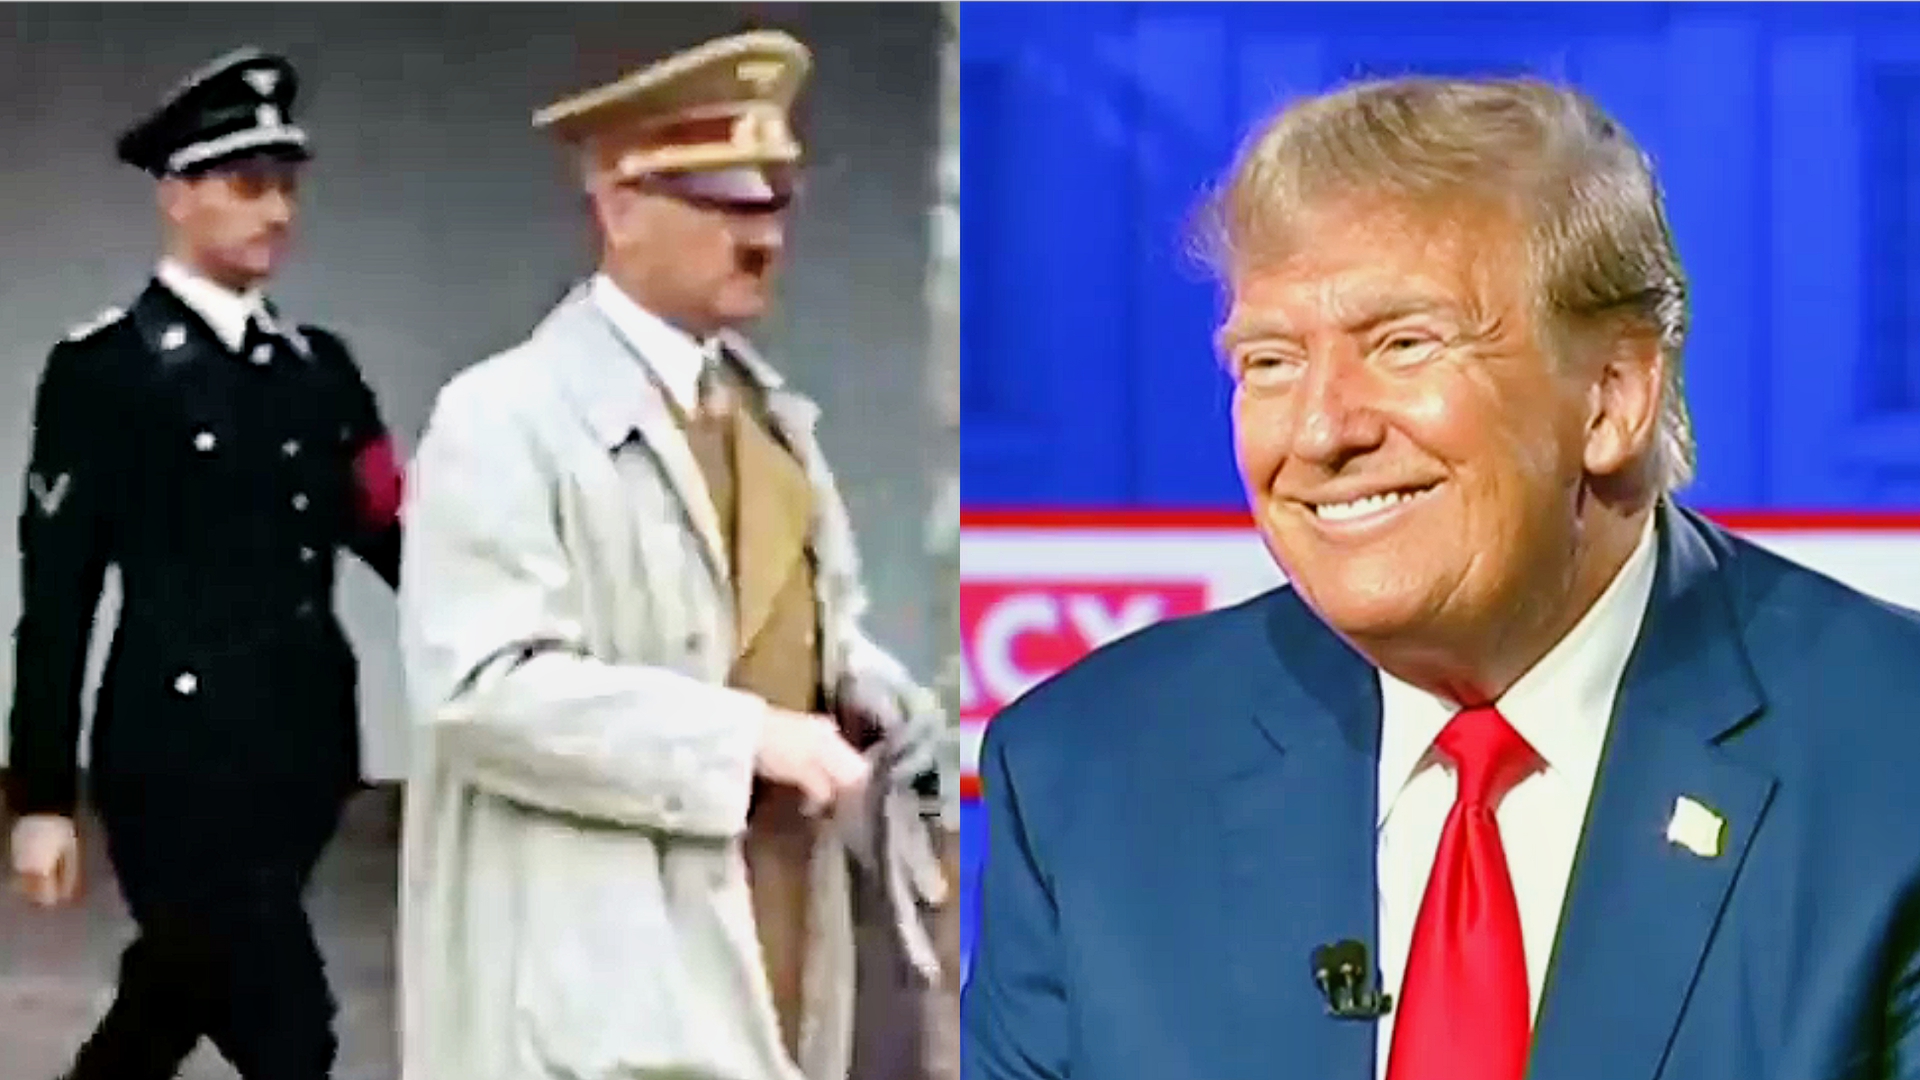 Trump’s Jaw-Dropping Praise For Nazi Leader Adolph Hitler Revealed To CNN By Ex-Chief Kelly (mediaite.com)